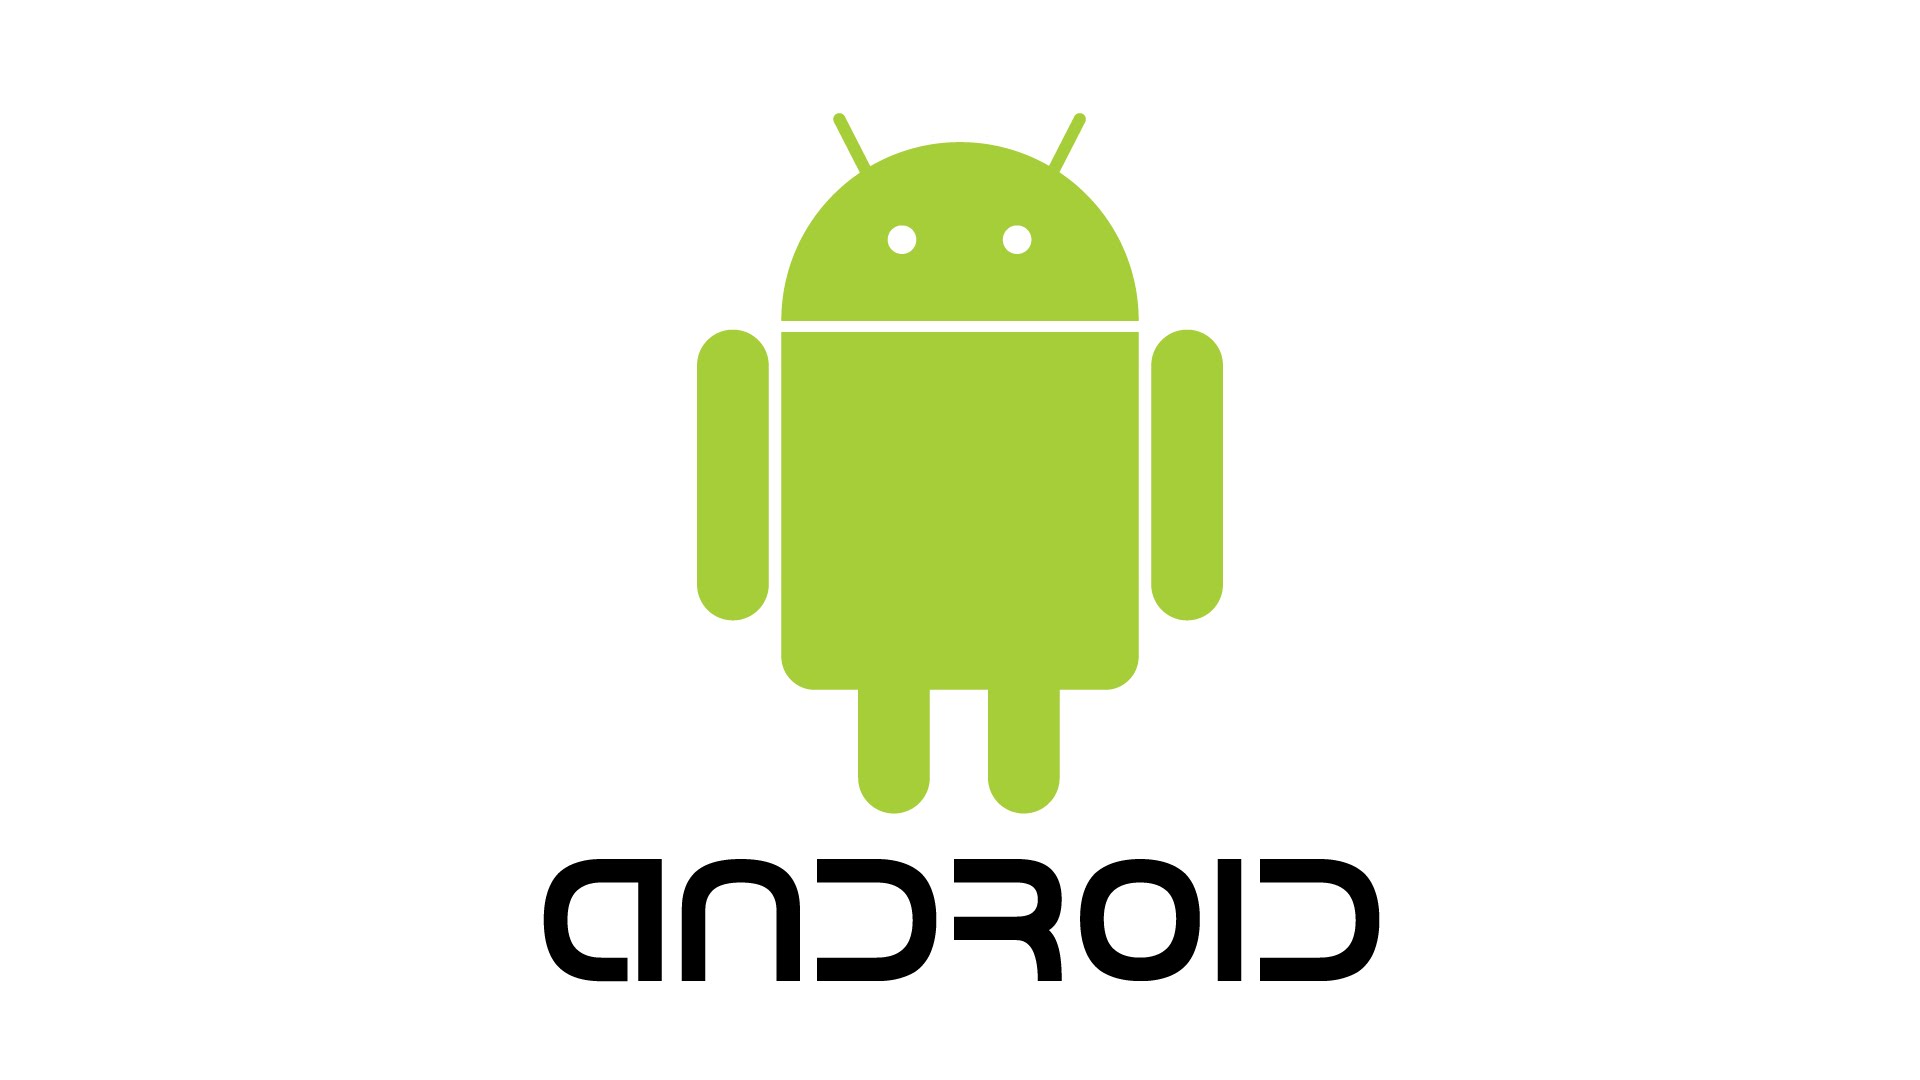 Android "加载中..." 动态效果实现 - 掘金